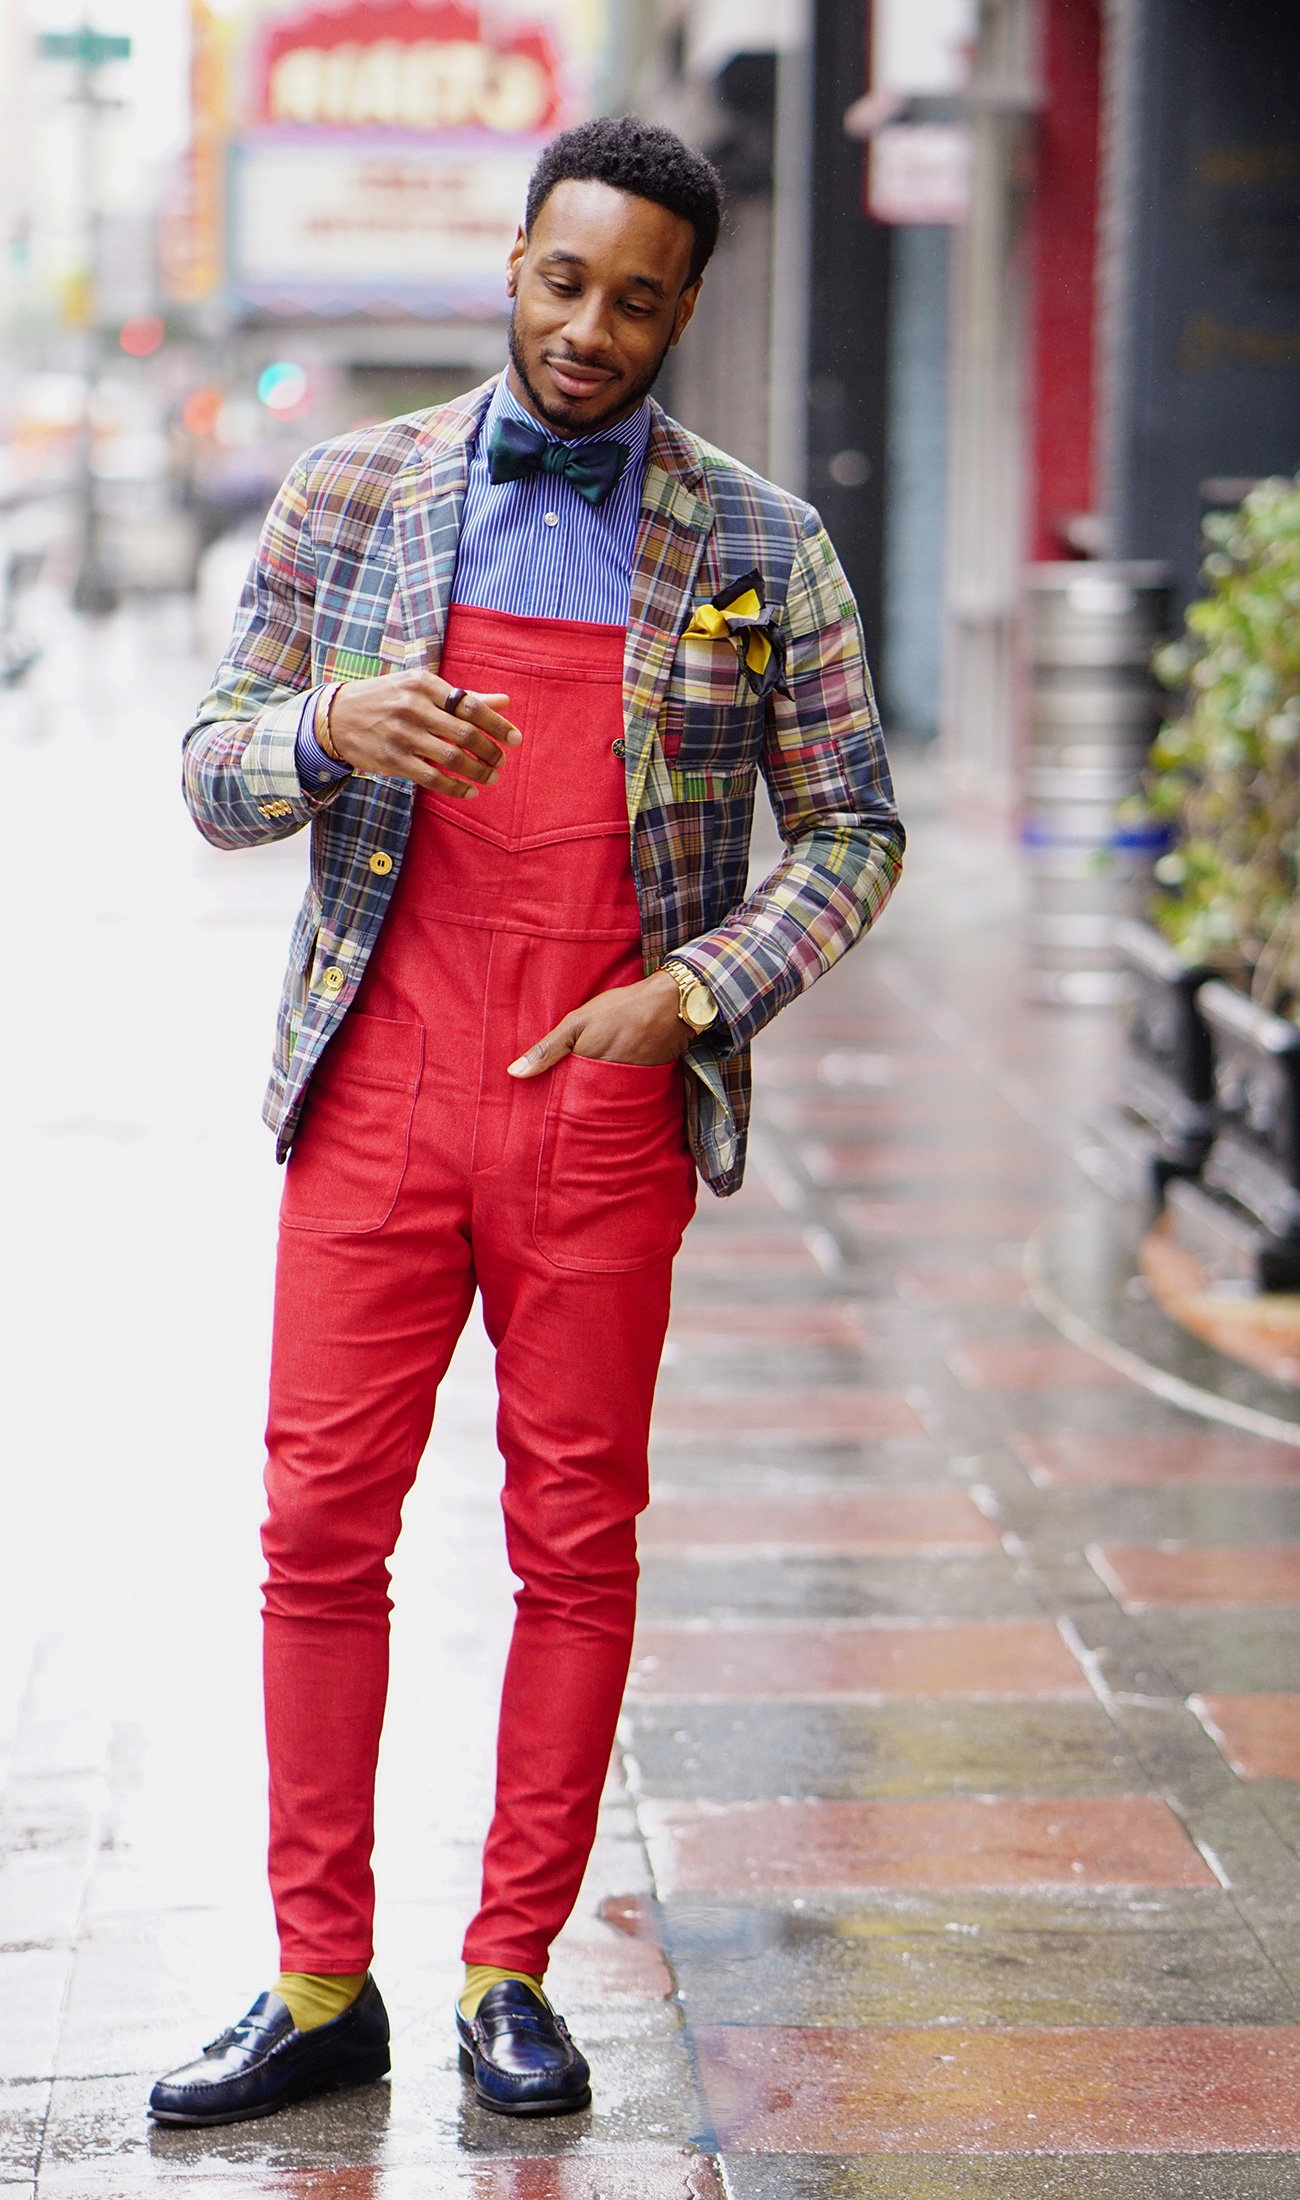 DIY: FIRE RED OVERALLS + SPORTS COAT + BOW TIE – Norris Danta Ford